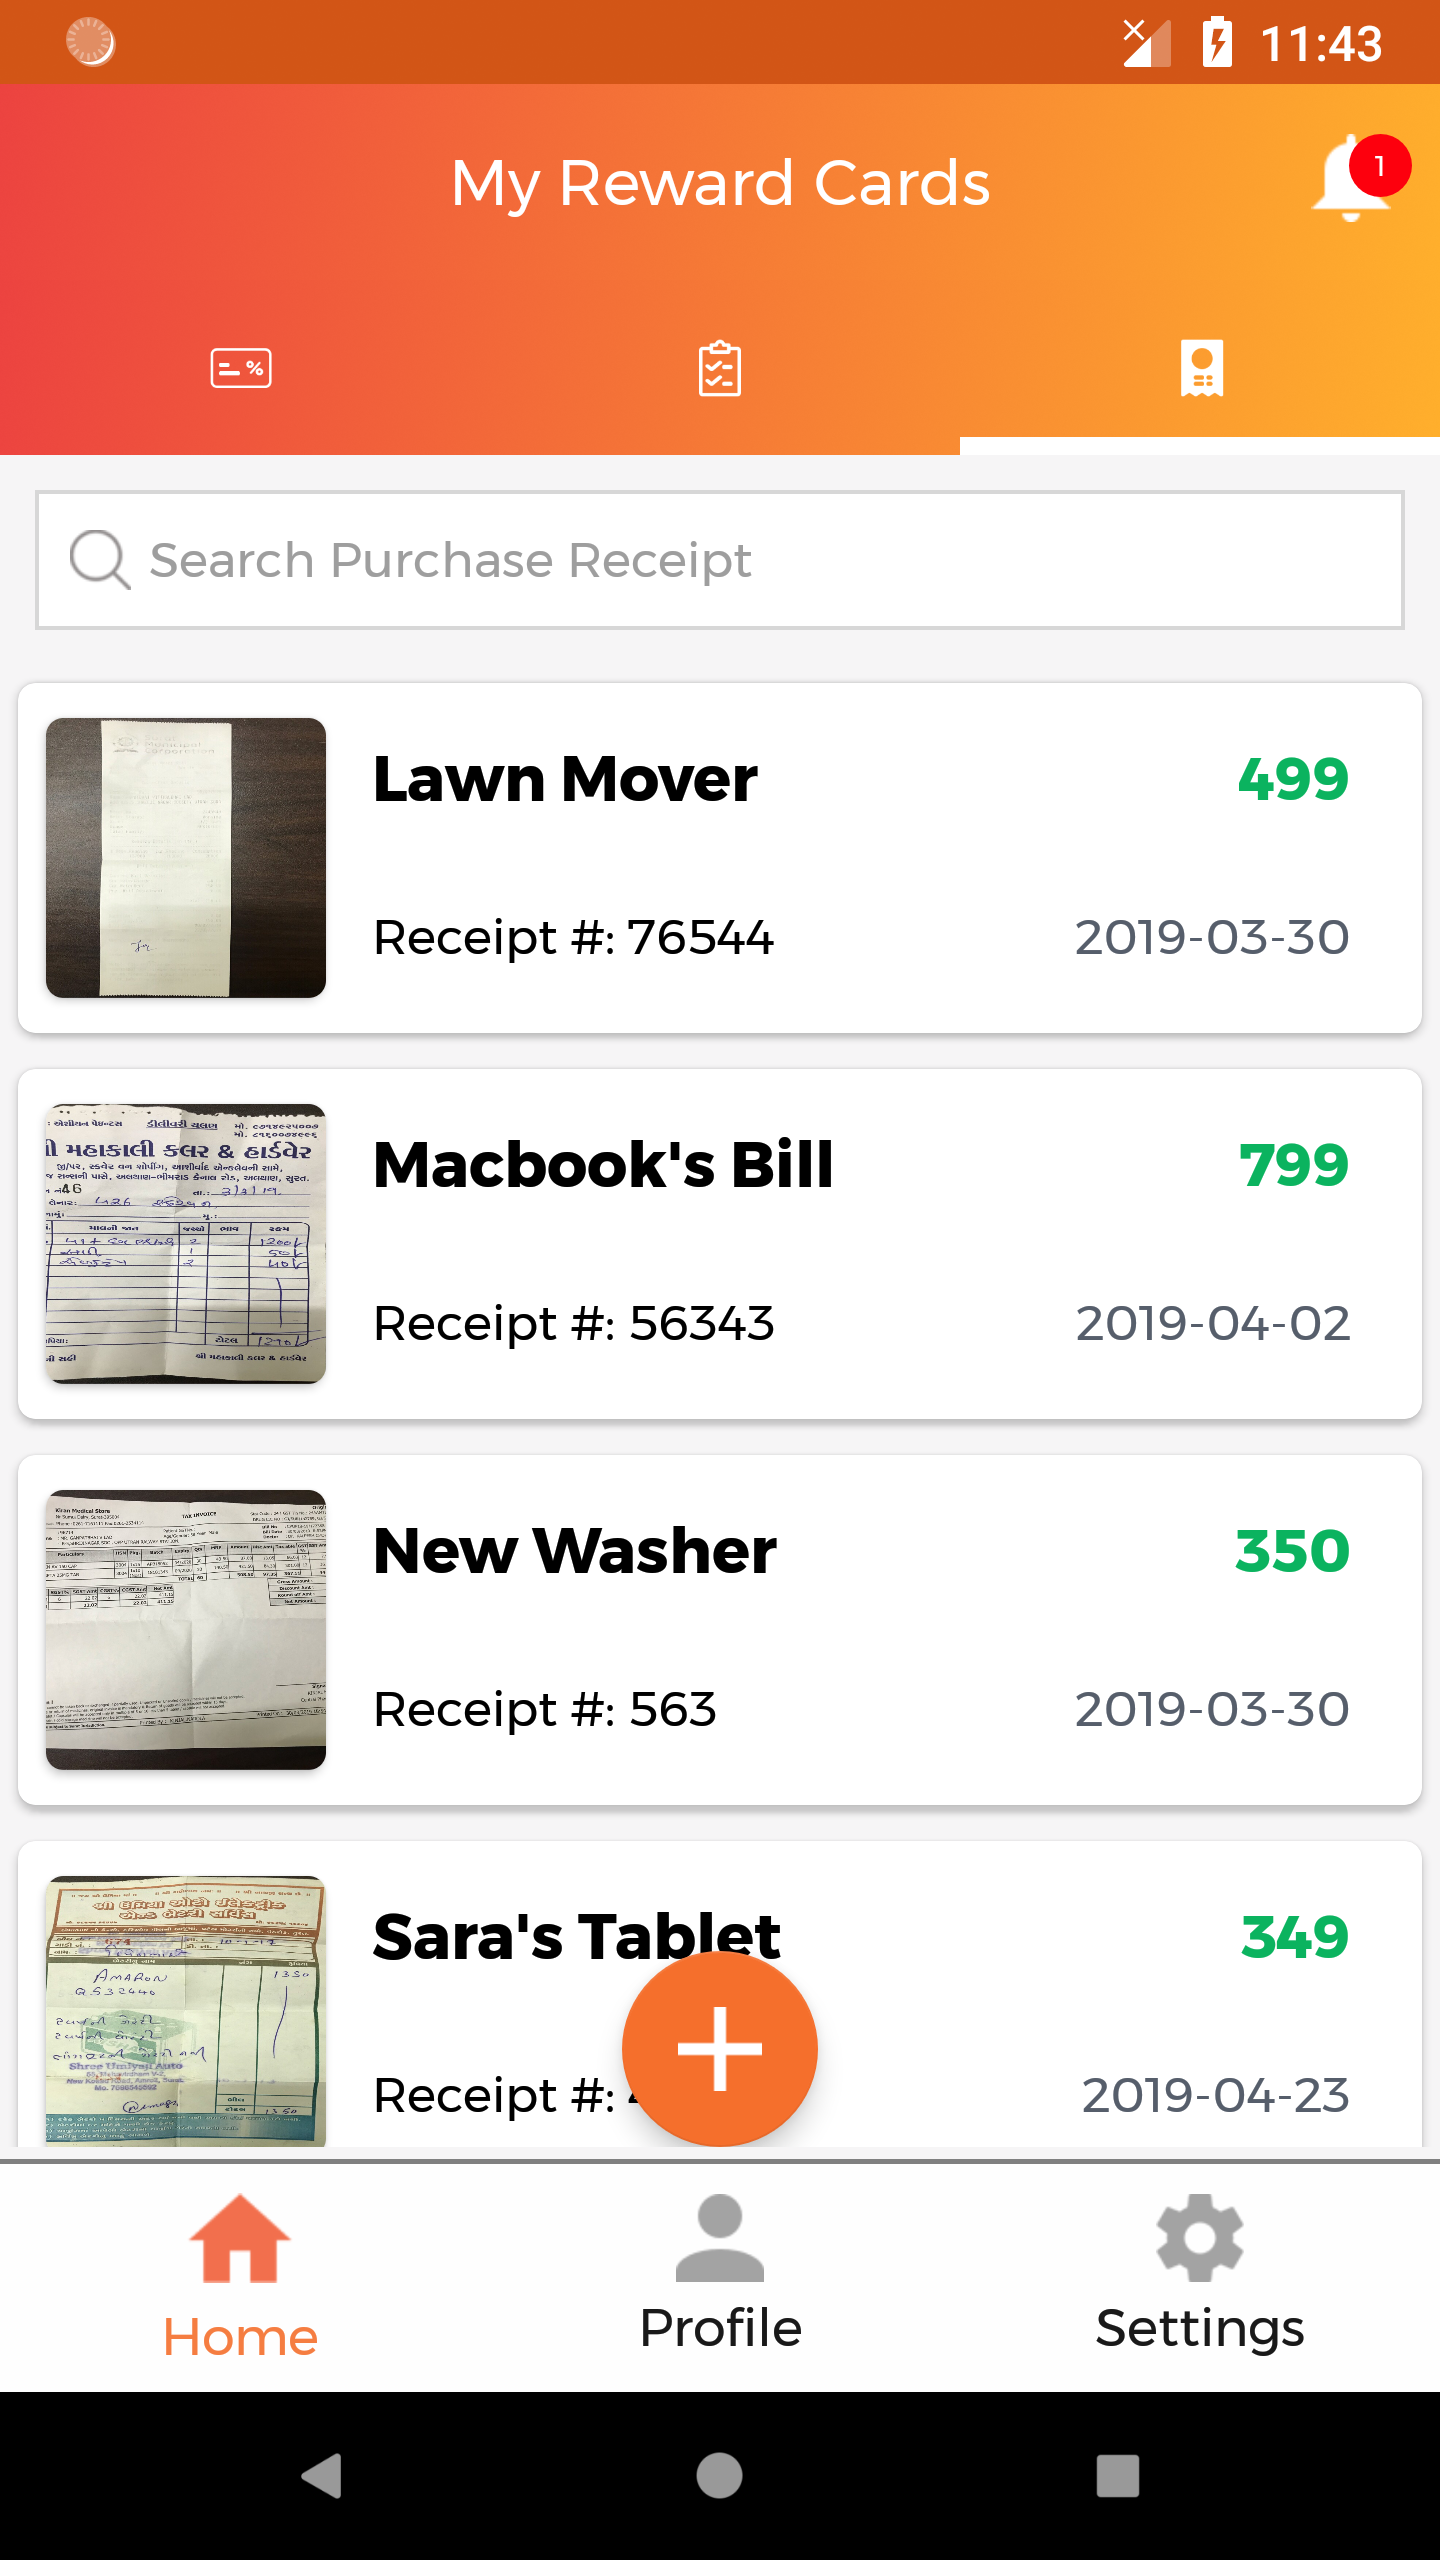 Store Your Purchase Receipts In Reward Cards App Reward Cards